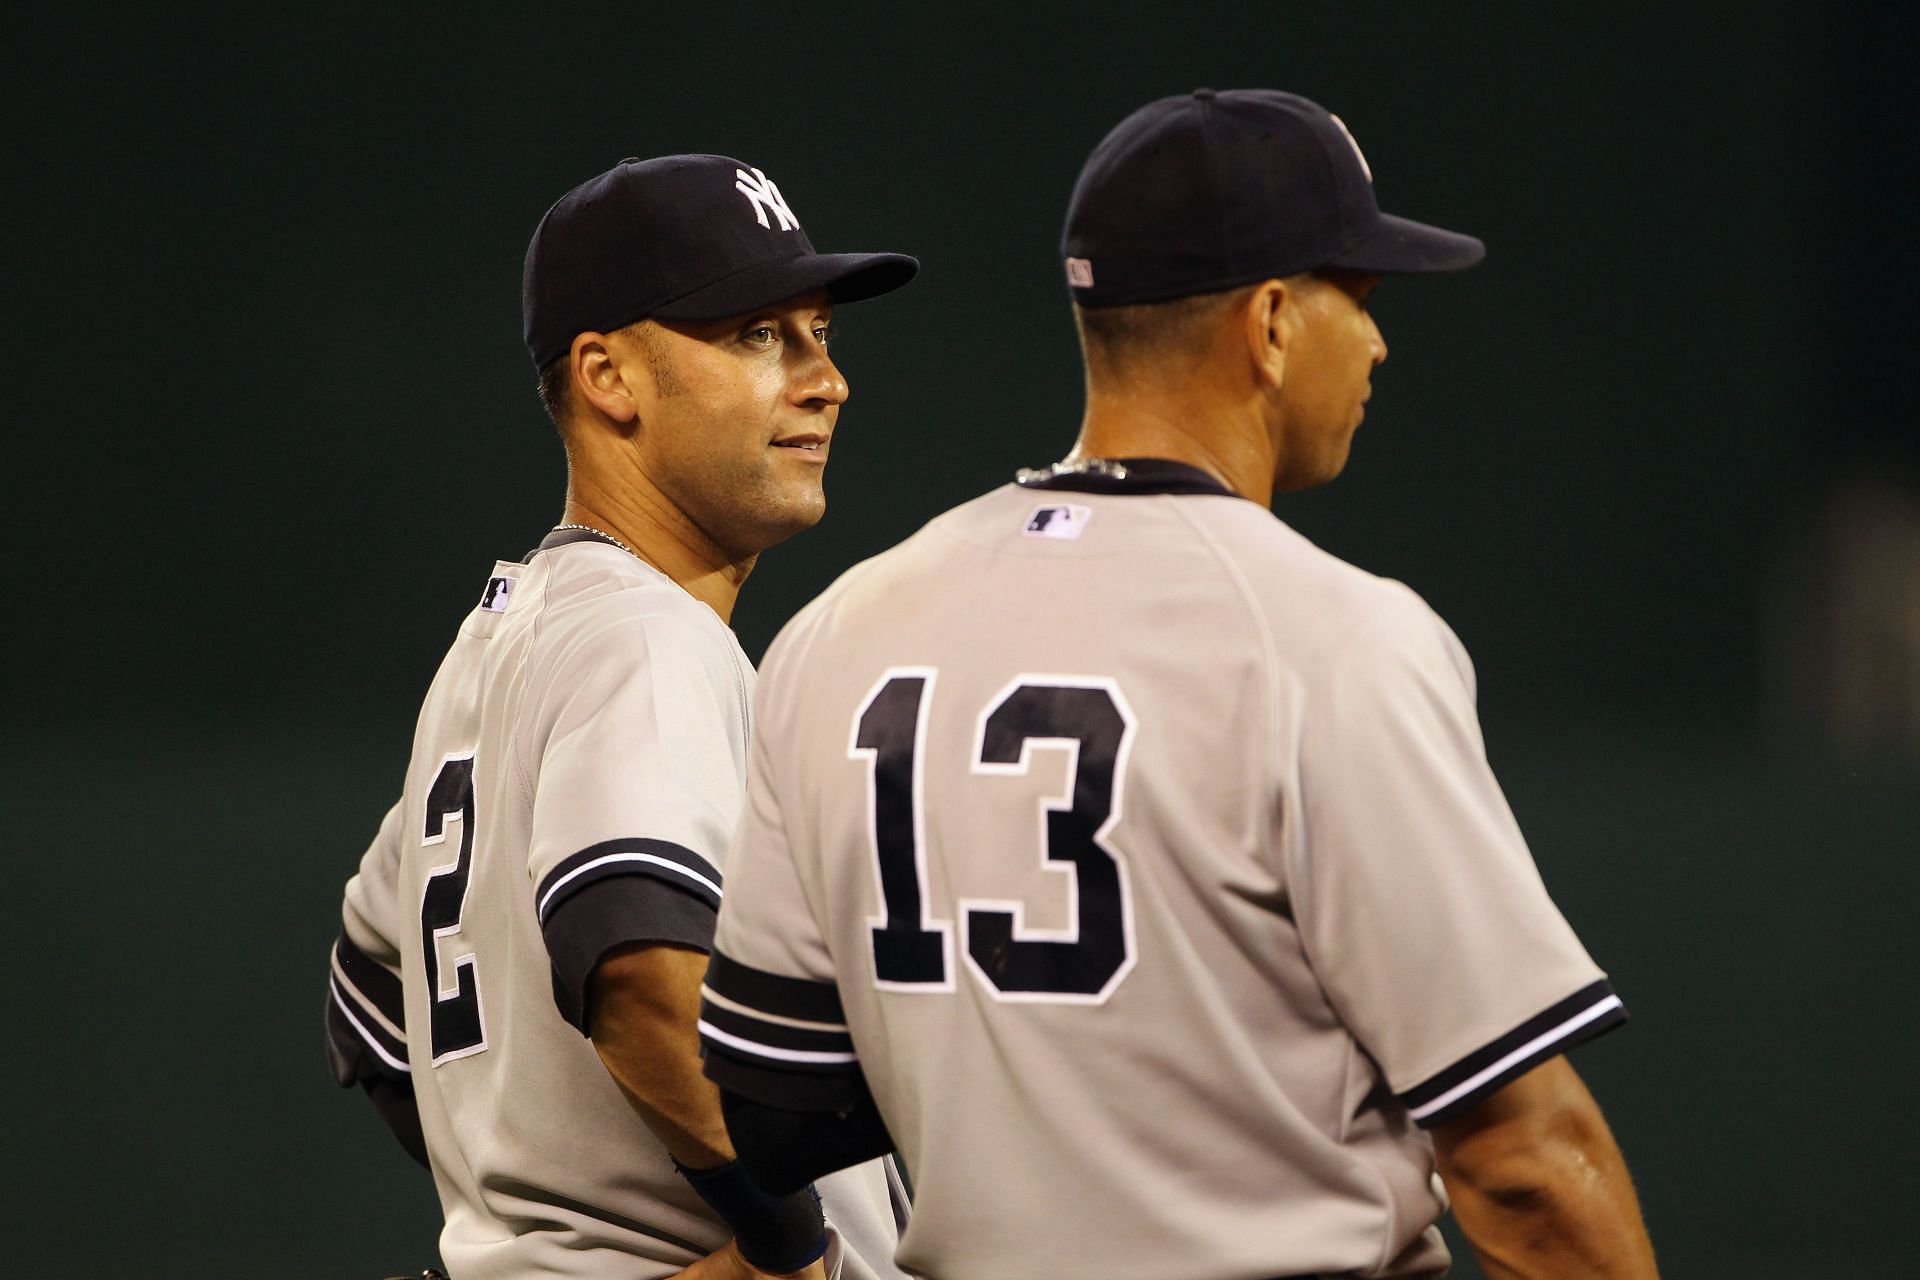 Derek Jeter #2 and Alex Rodriguez #13 of the New York Yankees chat while warming up prior to the 5th inning of the game against the Kansas City Royals on August 13, 2010 at Kauffman Stadium in Kansas City, Missouri.